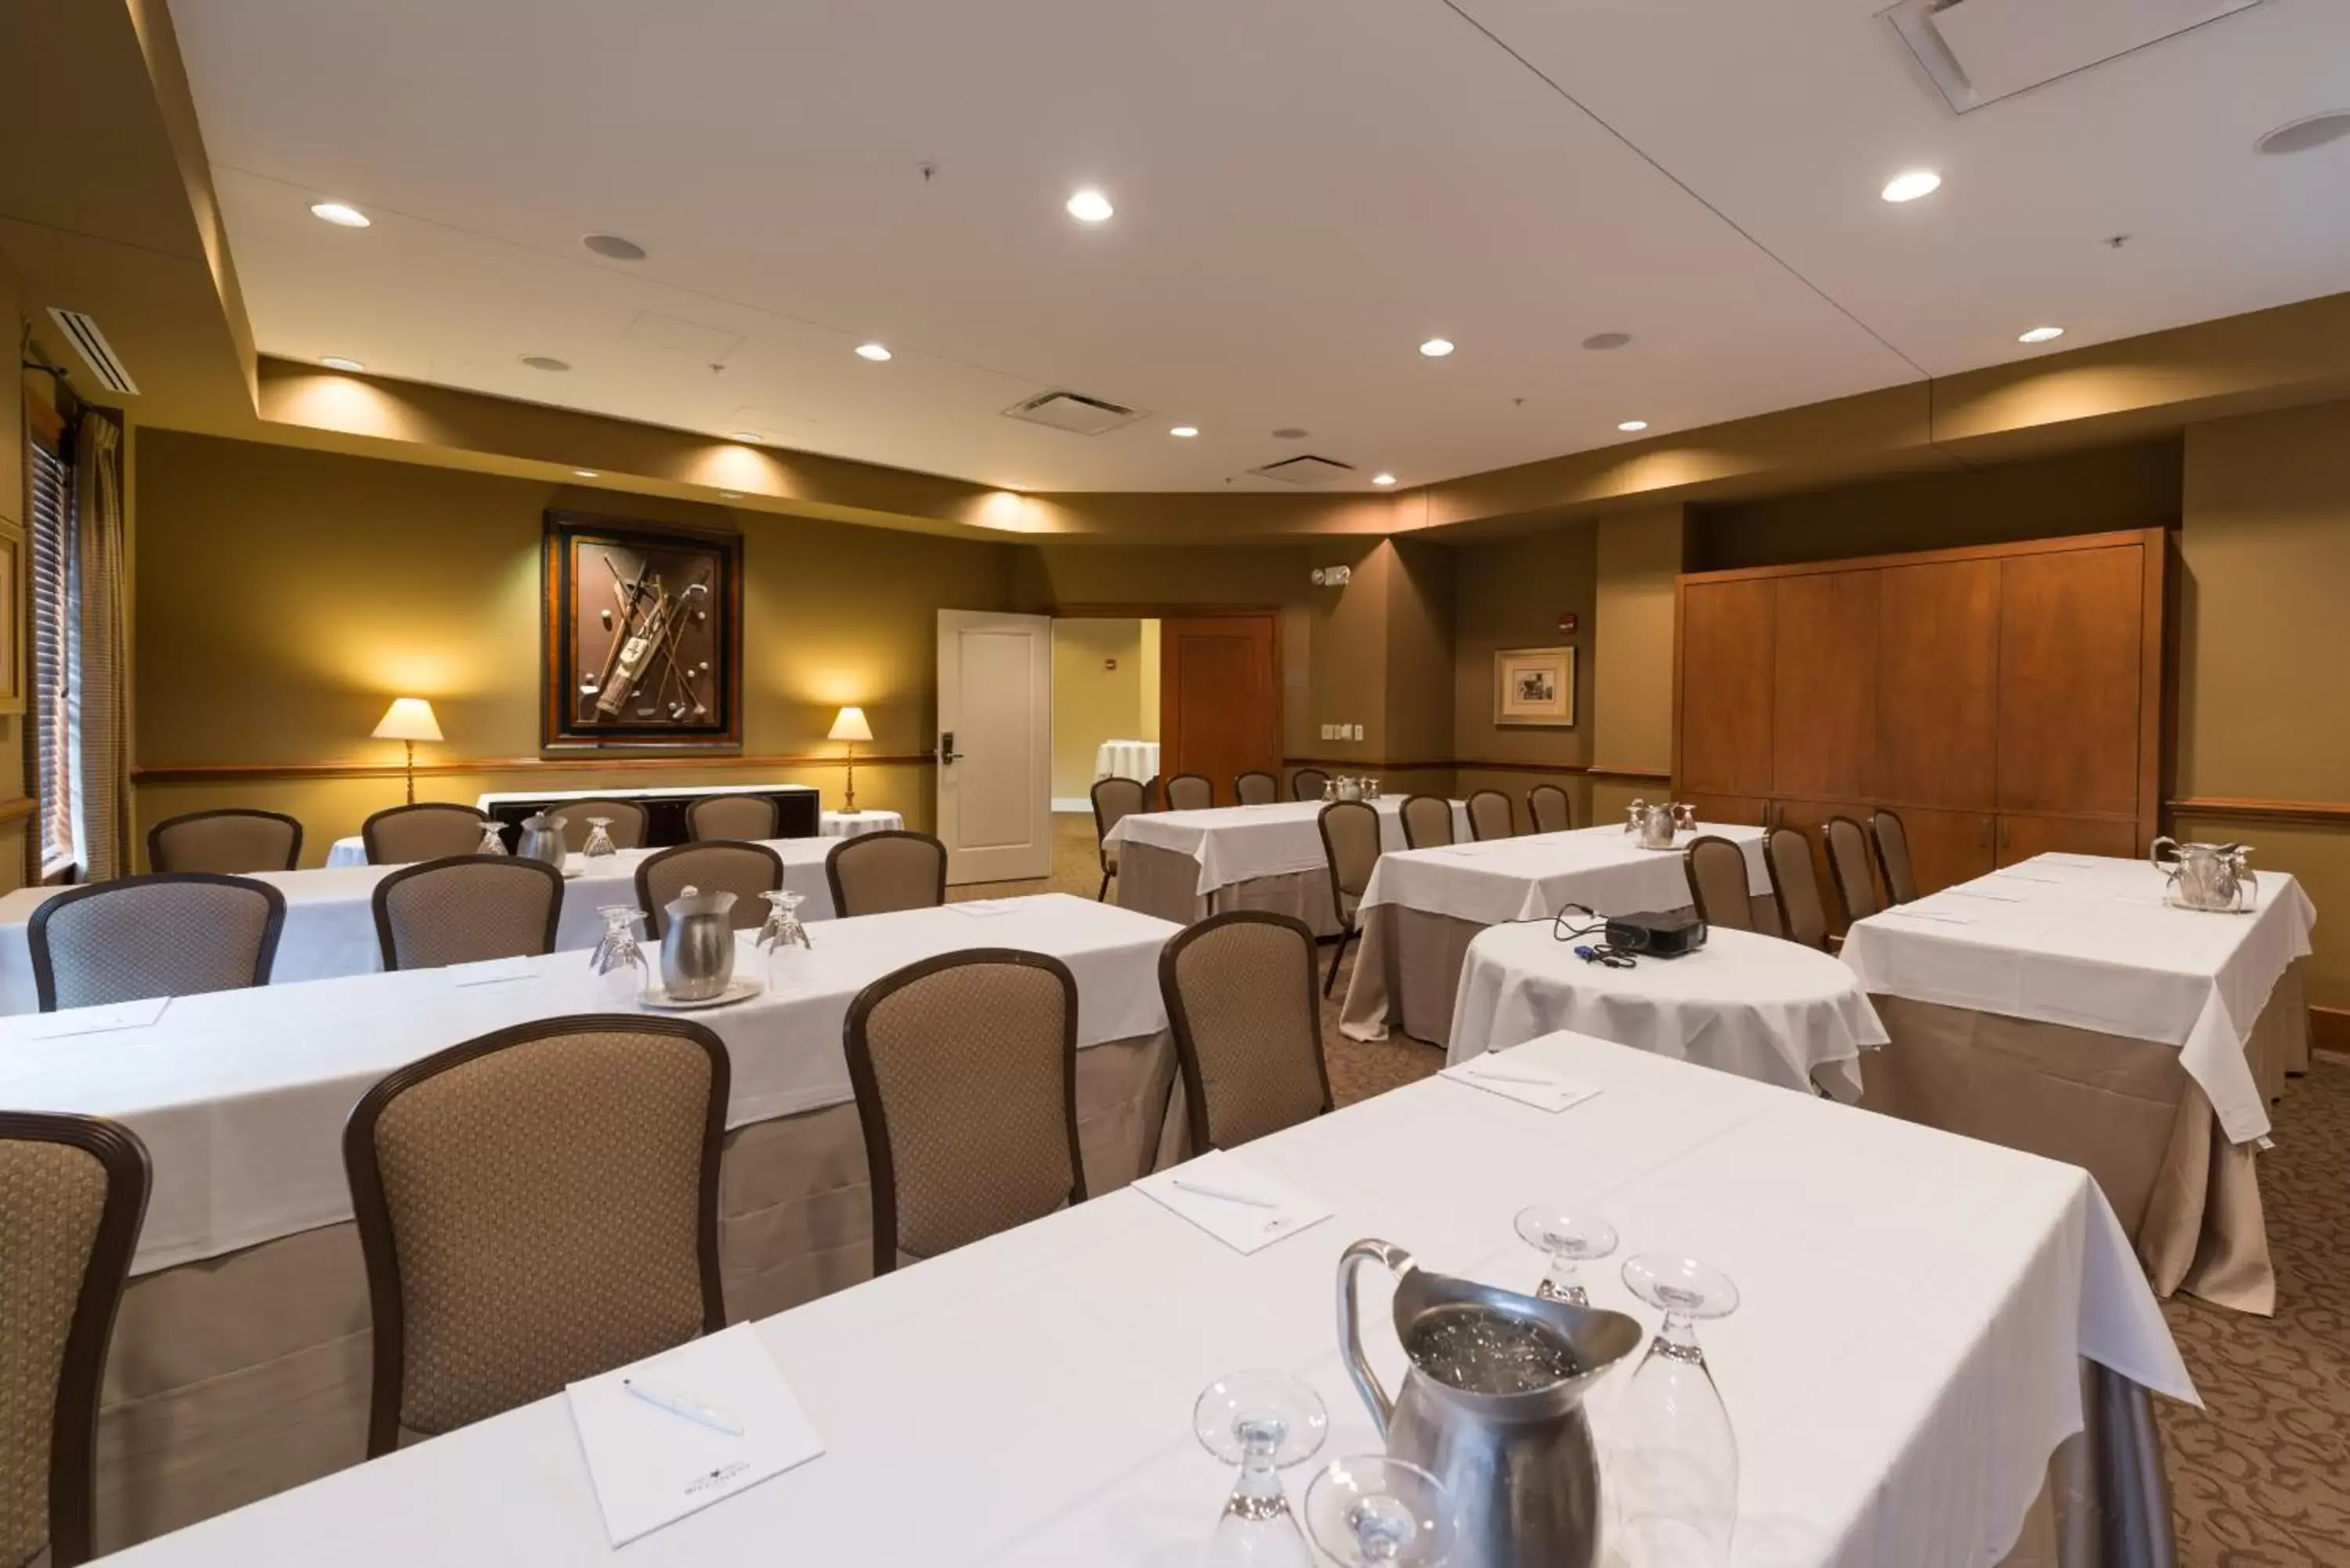 Meeting/conference room, Banquet Facilities in The Glen Club